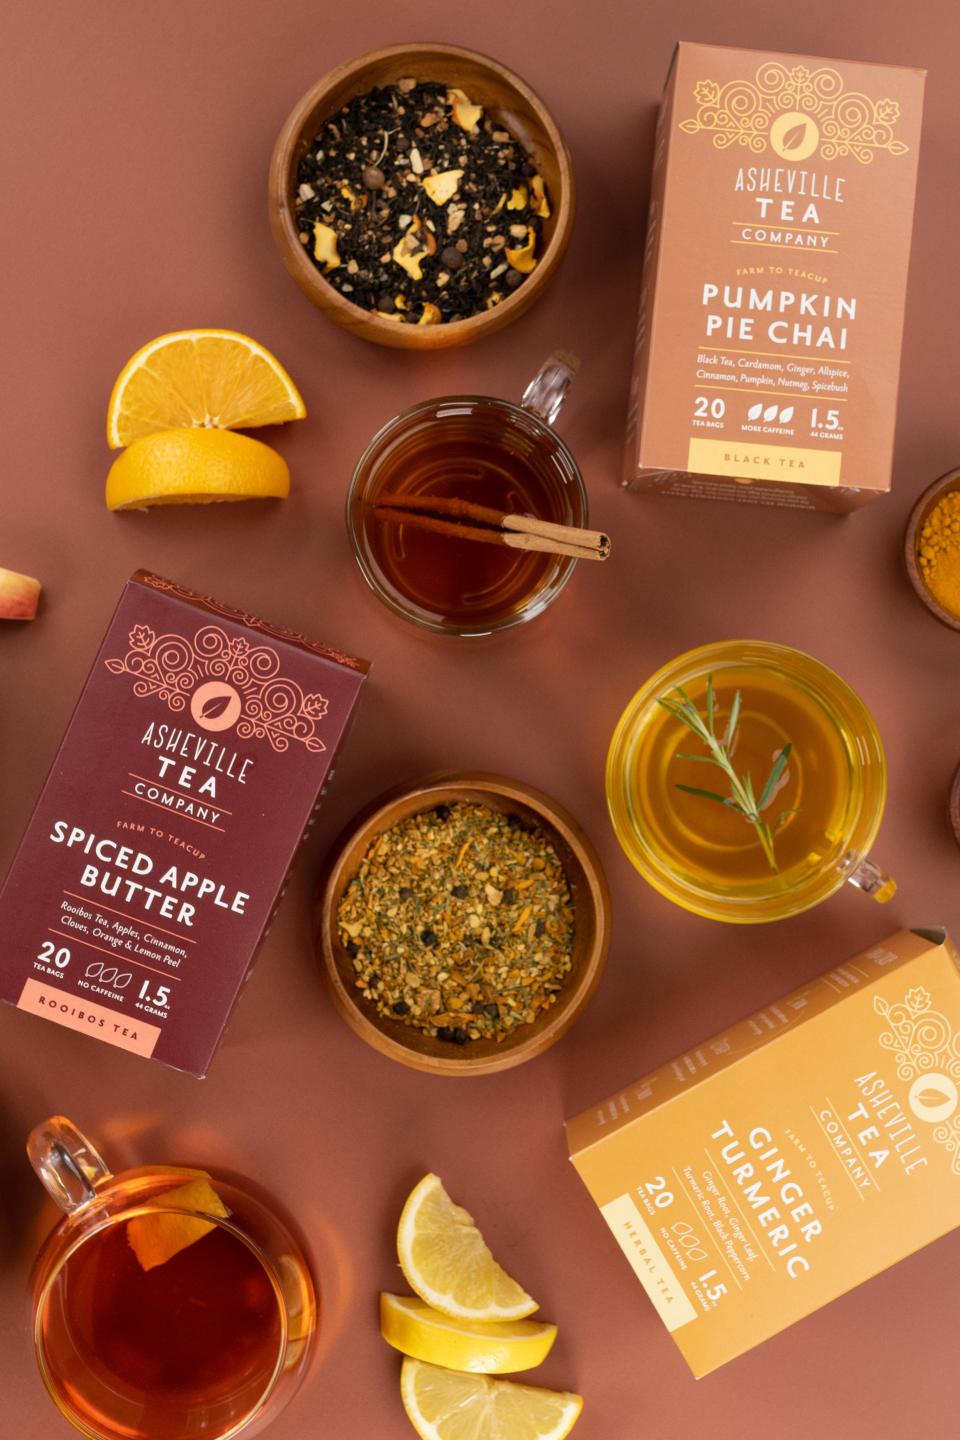 Asheville Tea Company's fall 2023 releases are Pumpkin Pie Chai, Ginger Tumeric and Spiced Apple Butter teas.